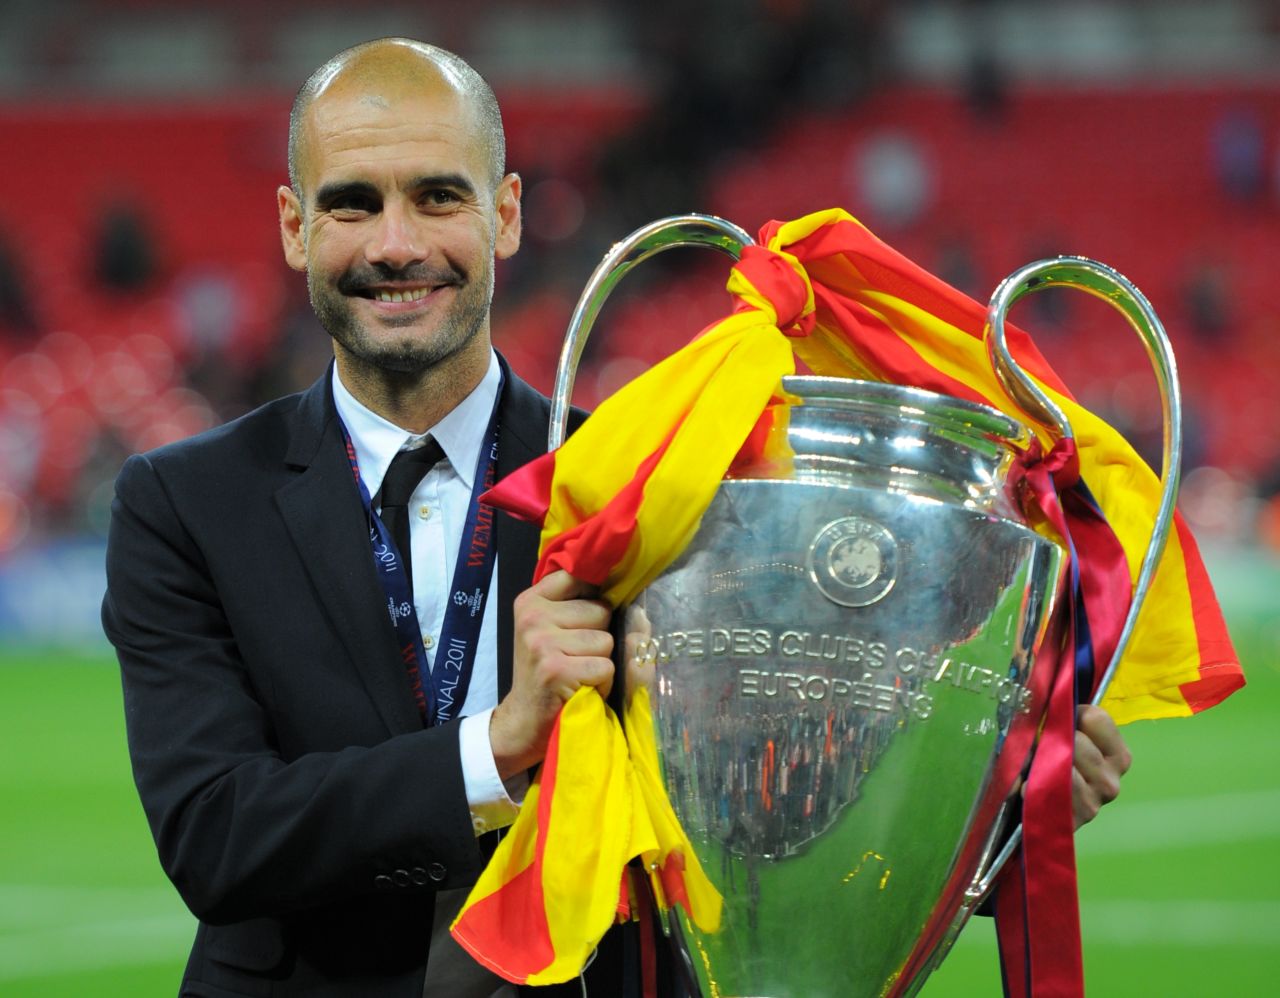 European glory did not elude Guardiola in his first coaching job, with Spanish giants Barcelona. As well as winning three La Liga titles he also won two Champions League crowns, in 2009 and 2011. In all, he won 14 major trophies in his four-year stint with the Catalan club.